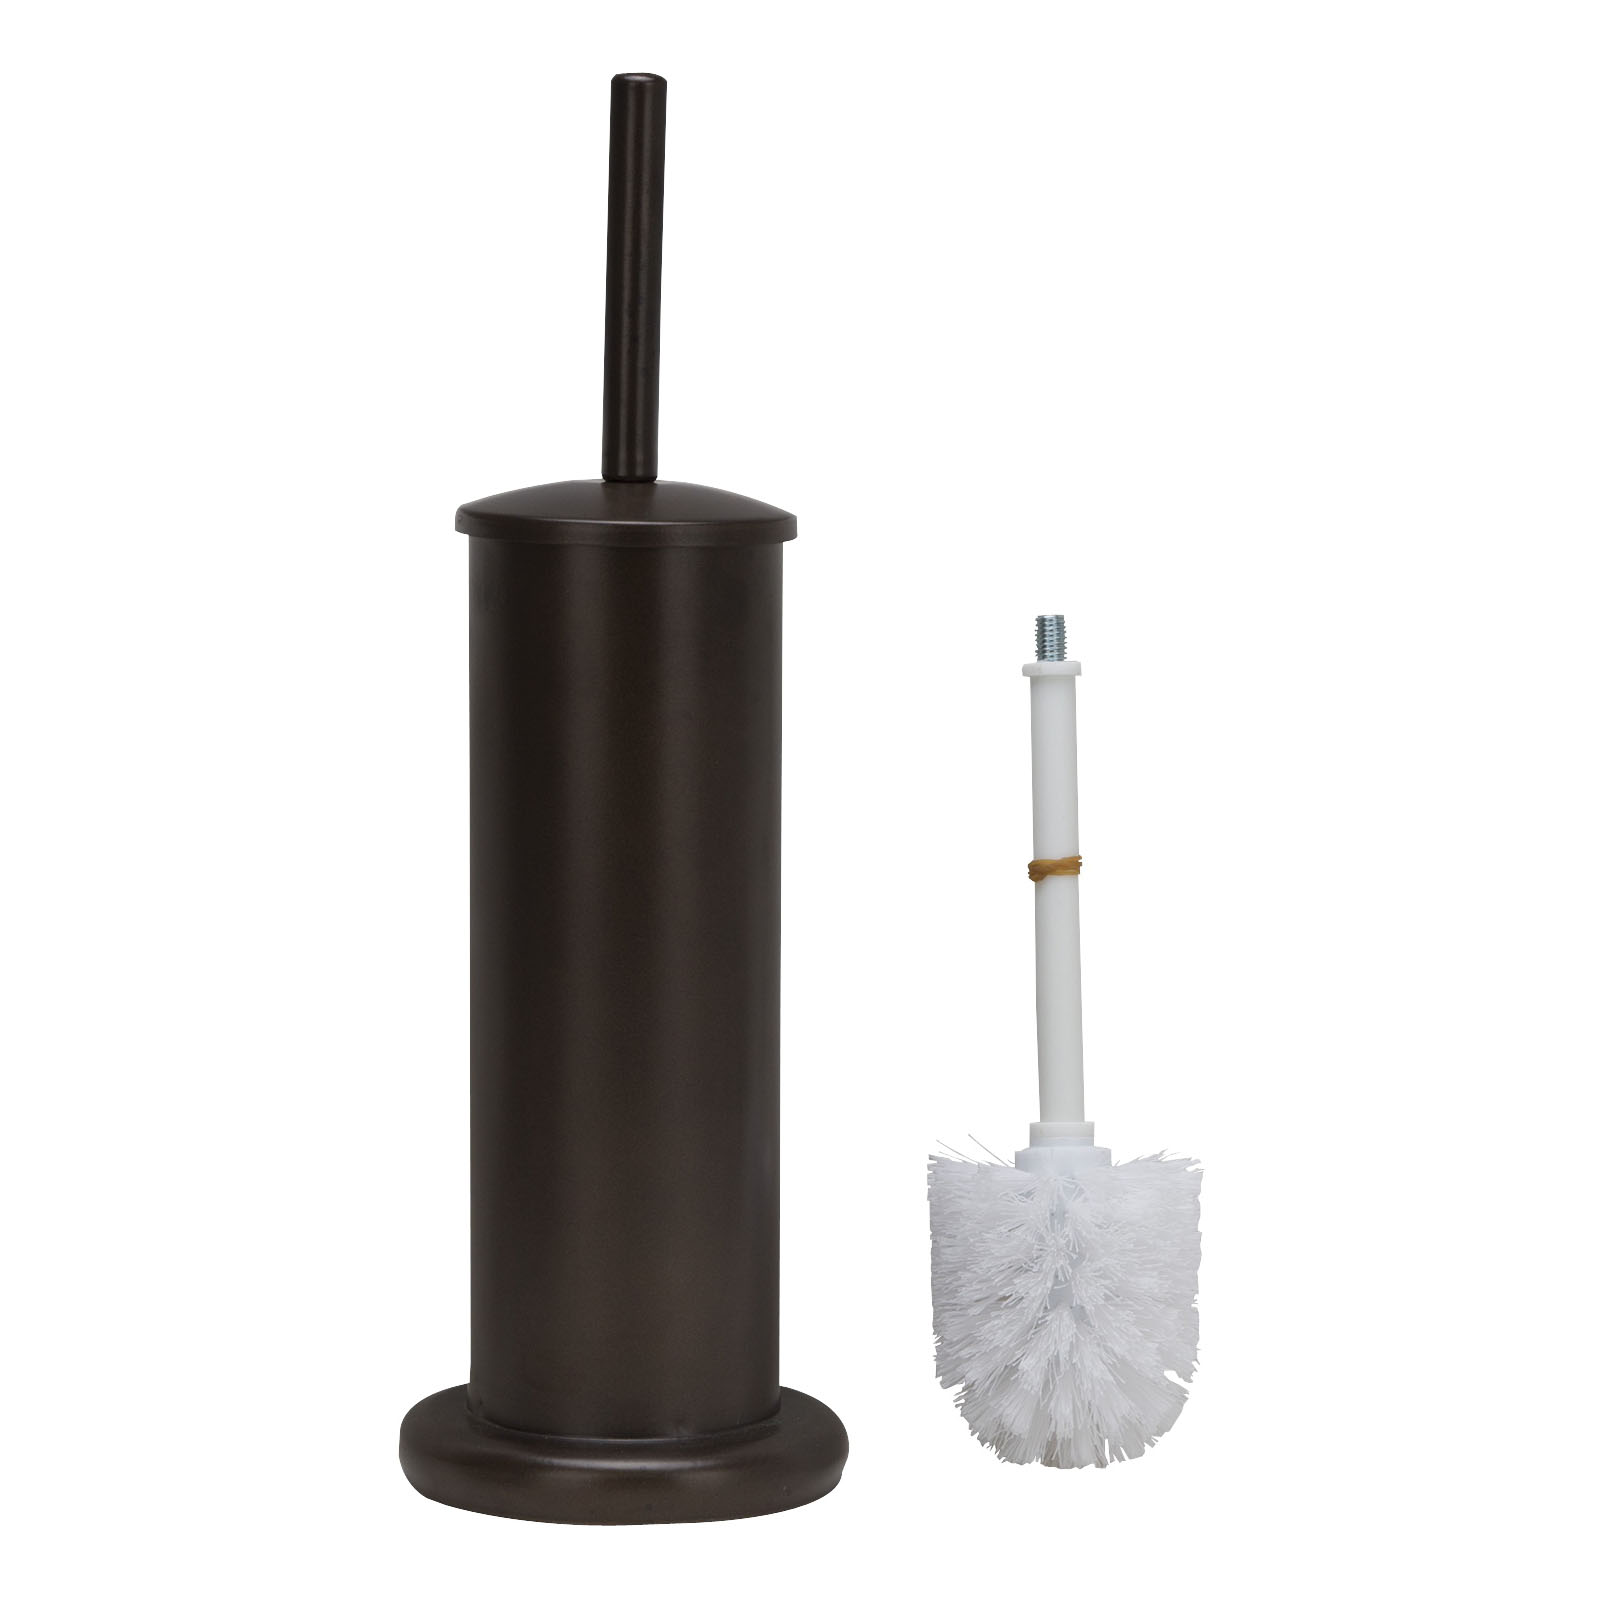 MYY004 Toilet Bowl Brush with Stand, Steel Holder